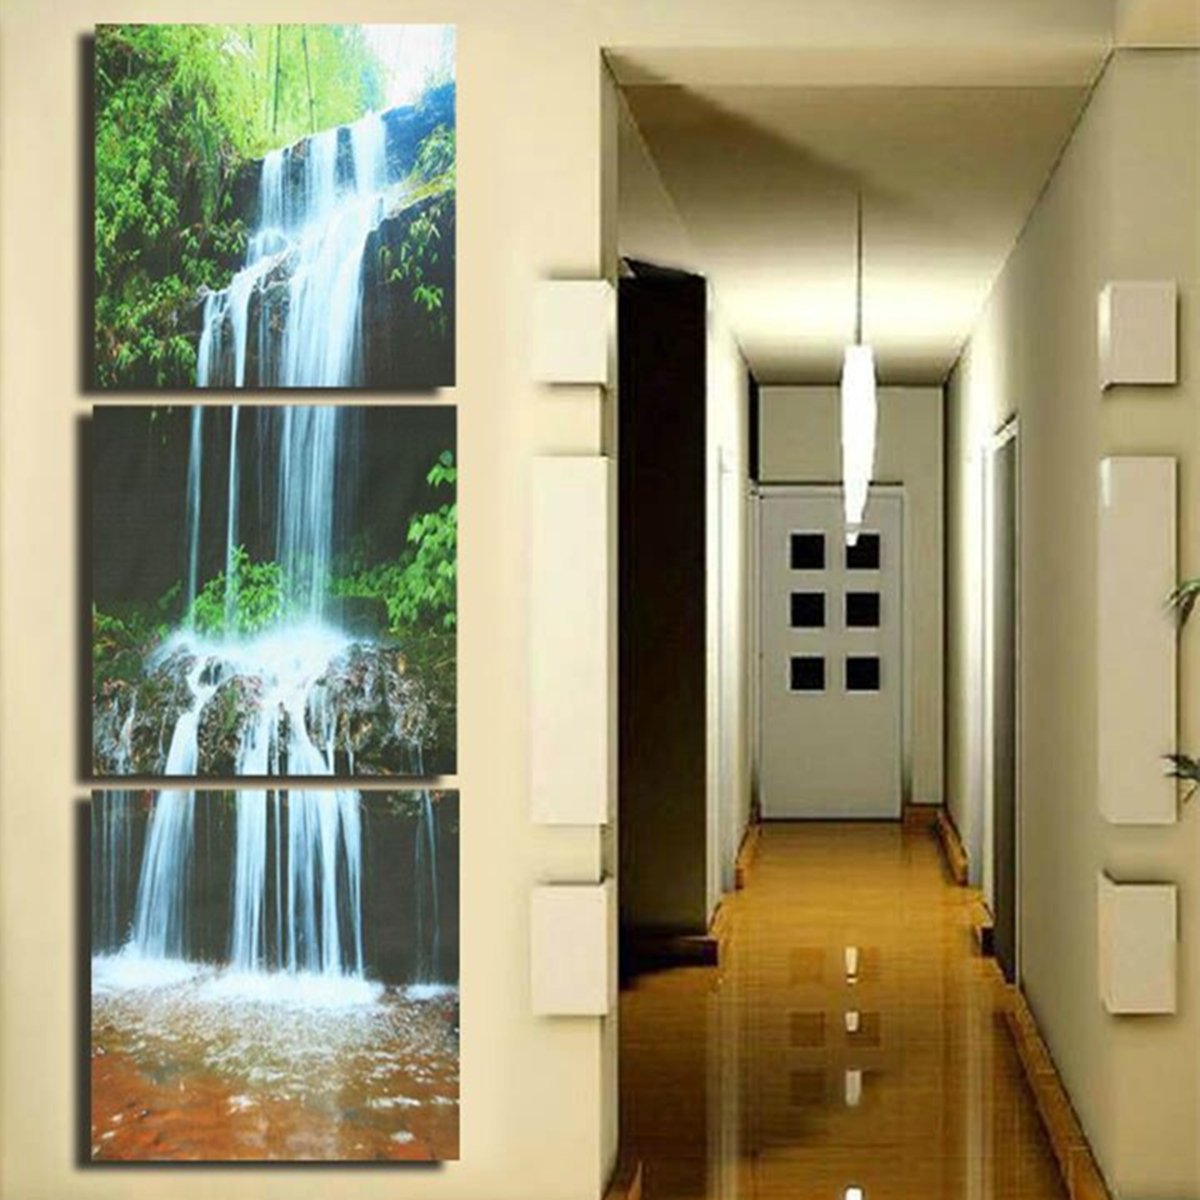 3-Cascade-Large-Waterfall-Framed-Print-Painting-Canvas-Wall-Art-Picture-Home-Decorate-Living-Room-1120885